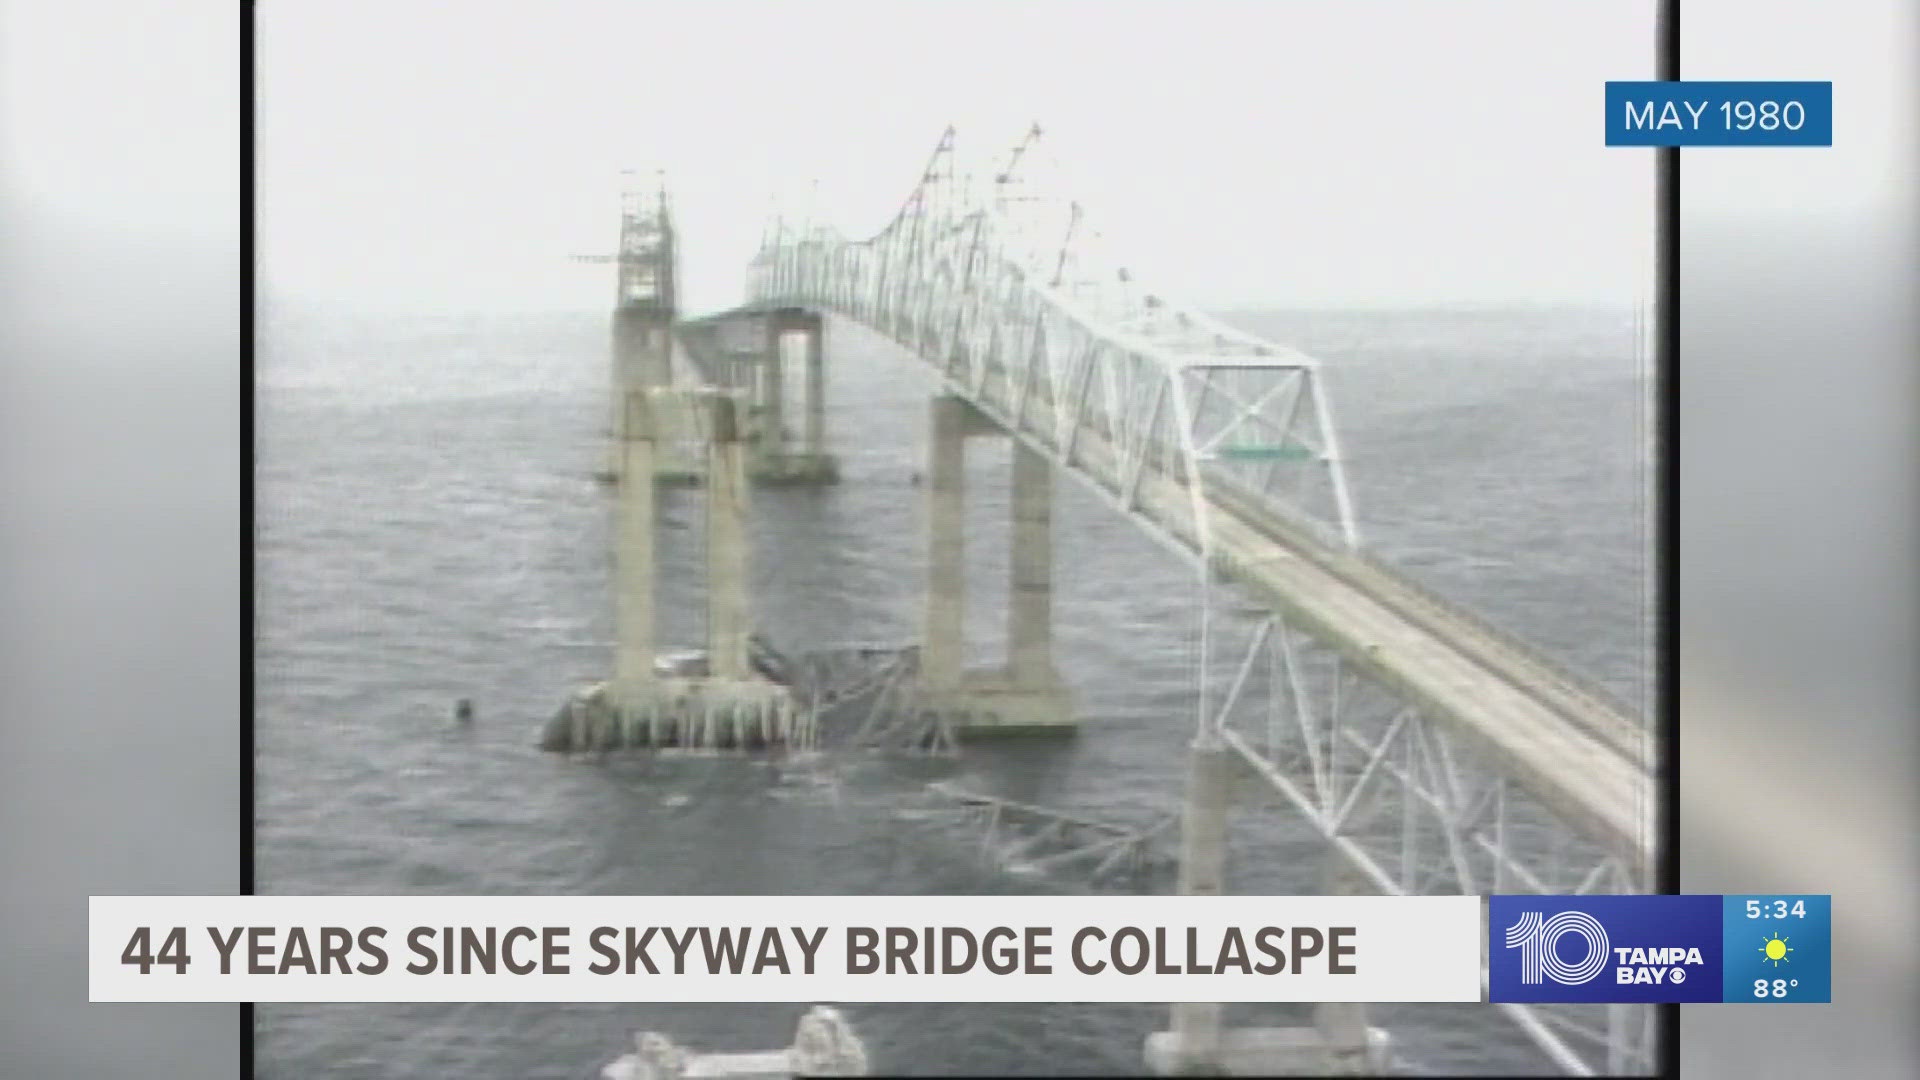 On May 9th, 1980, a freighter struck a support column on the old bridge during morning rush hour.